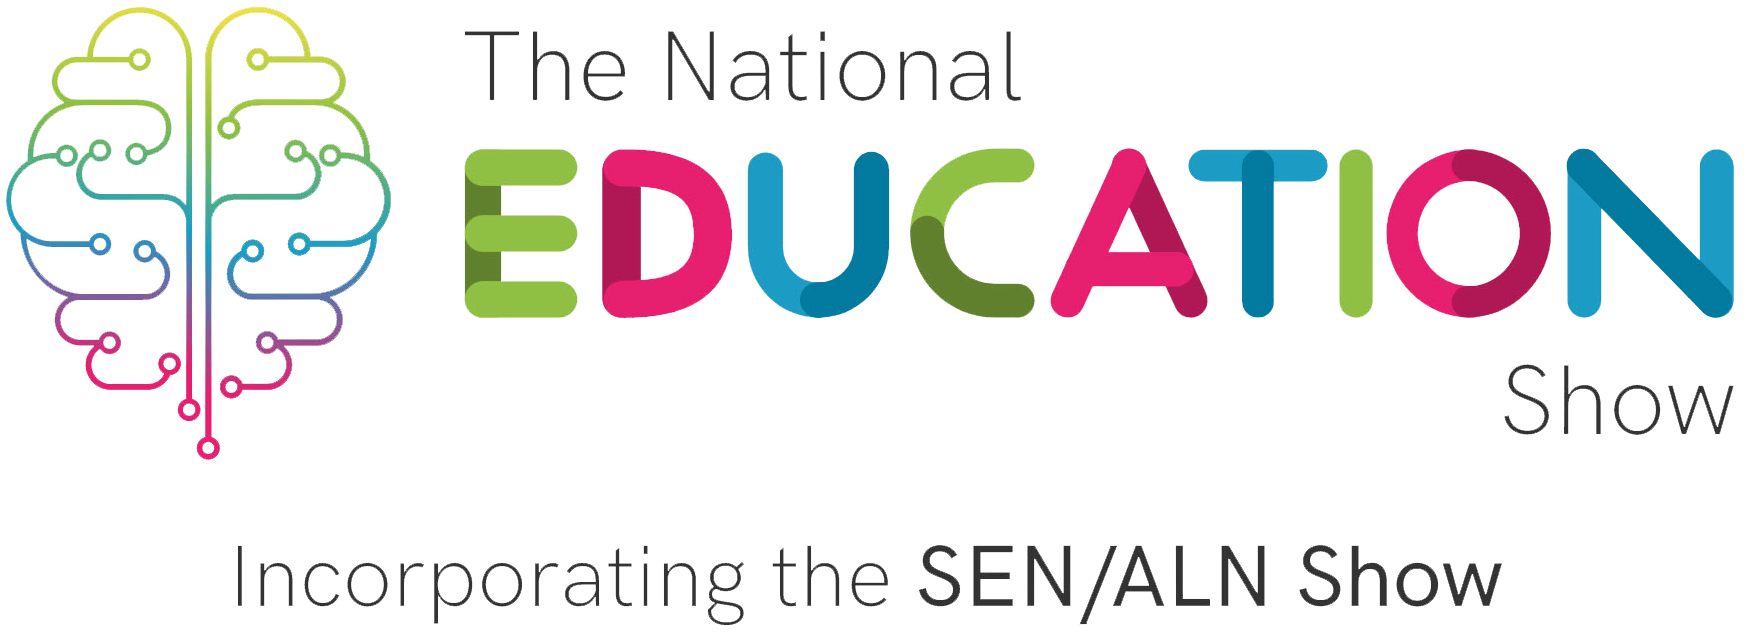 The National Education Show, Incorporating the SEN/ALN Show